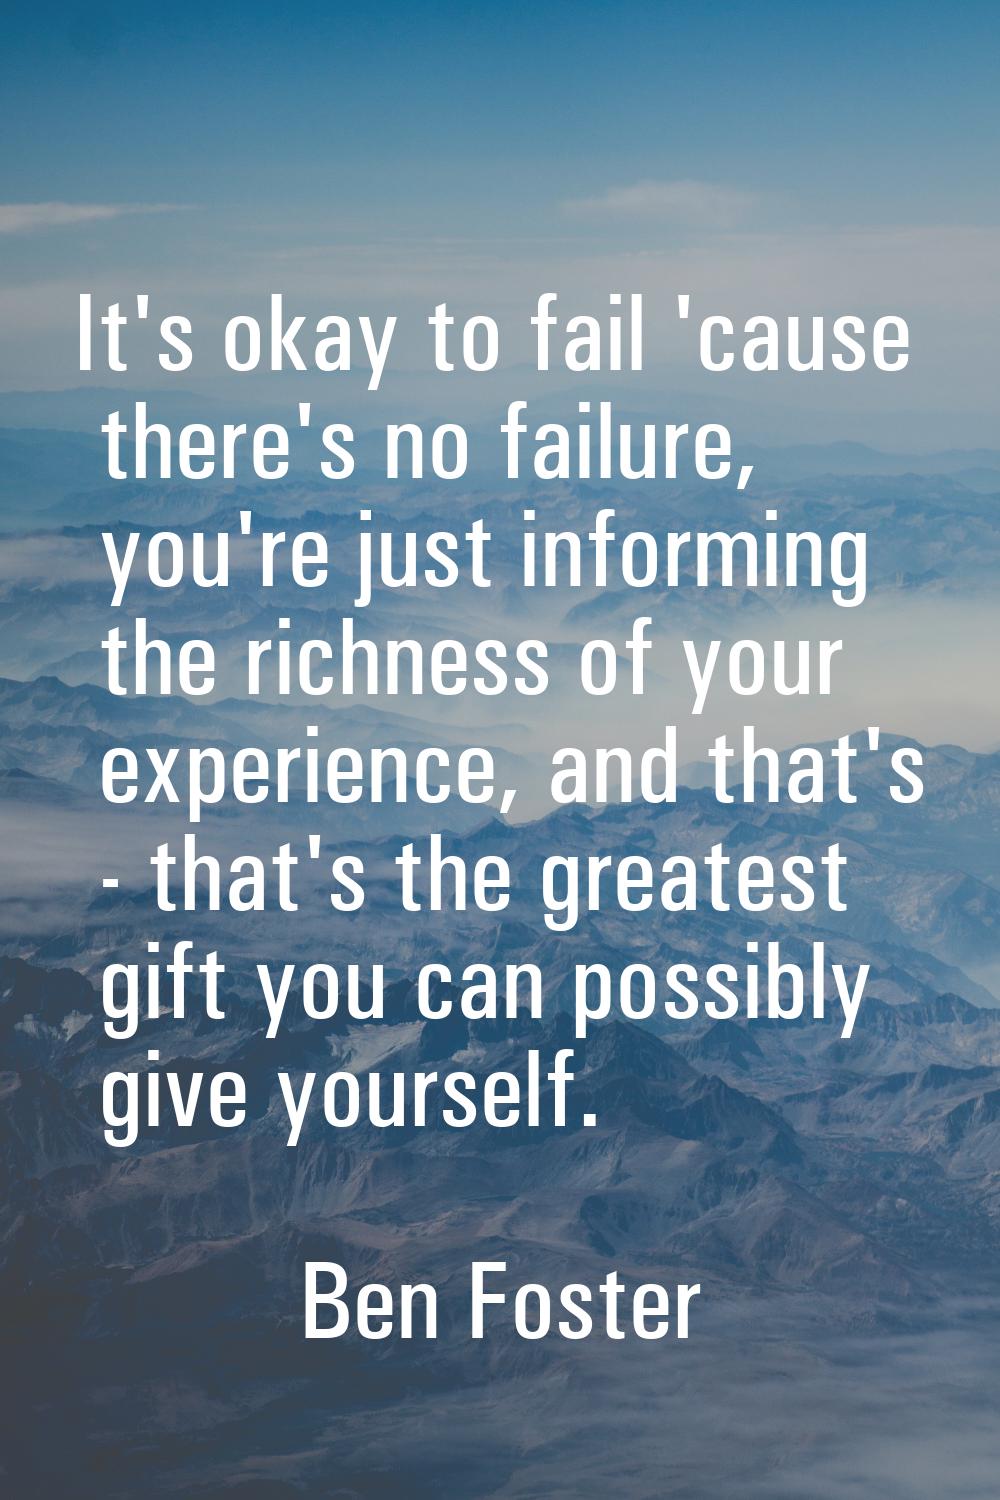 It's okay to fail 'cause there's no failure, you're just informing the richness of your experience,